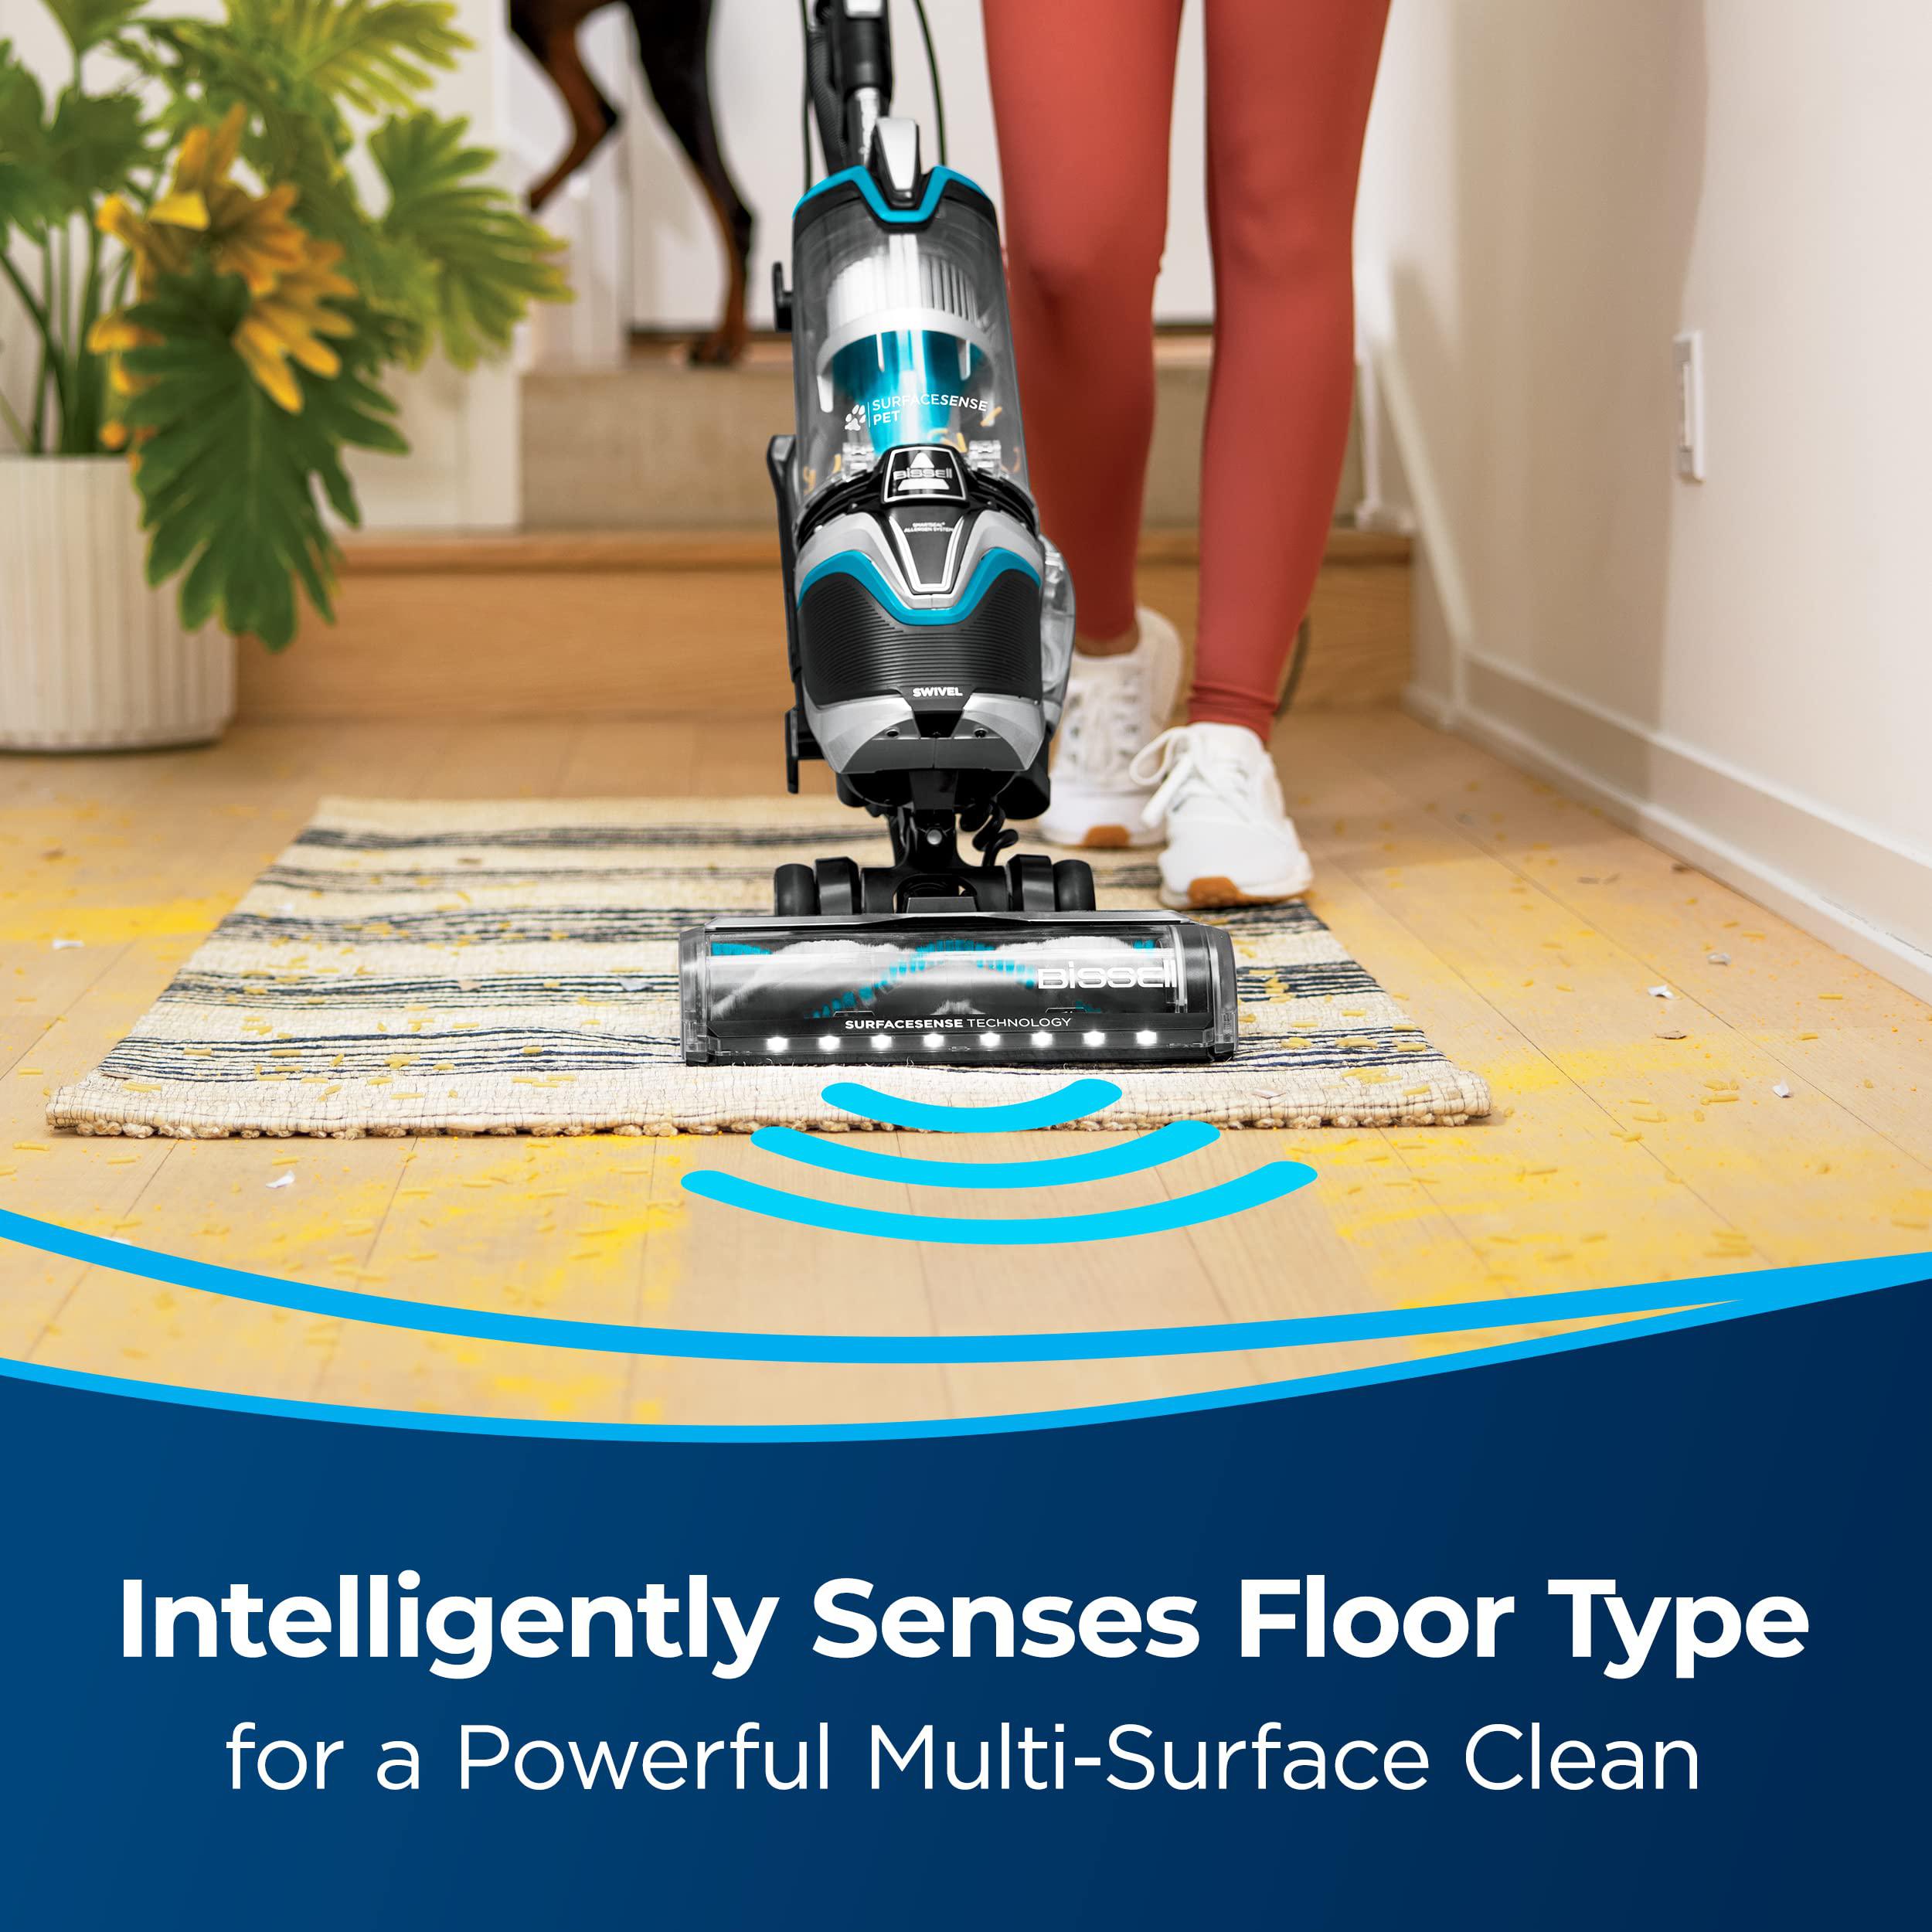 bissell surfacesense pet upright vacuum, 28179, tangle-free multi-surface brush roll, led headlights, smartseal allergen syst